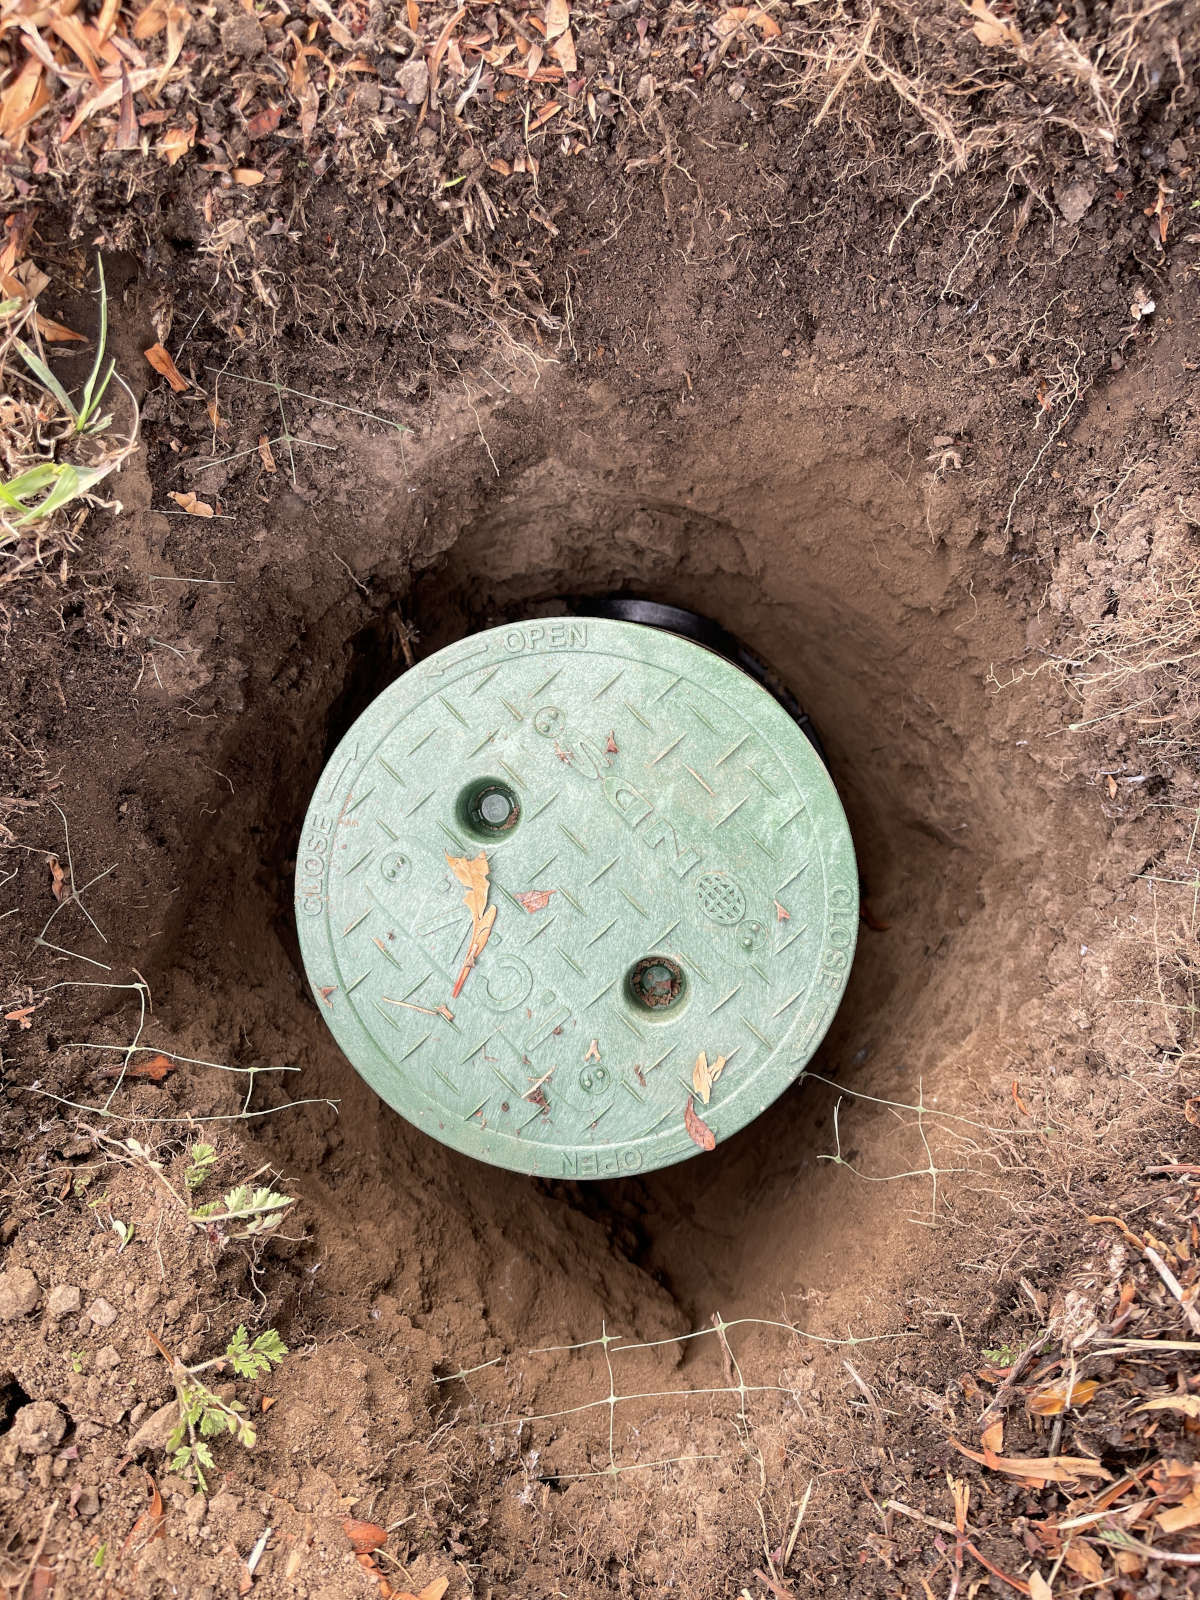 A round mulch basin with a green lid is buried in the soil